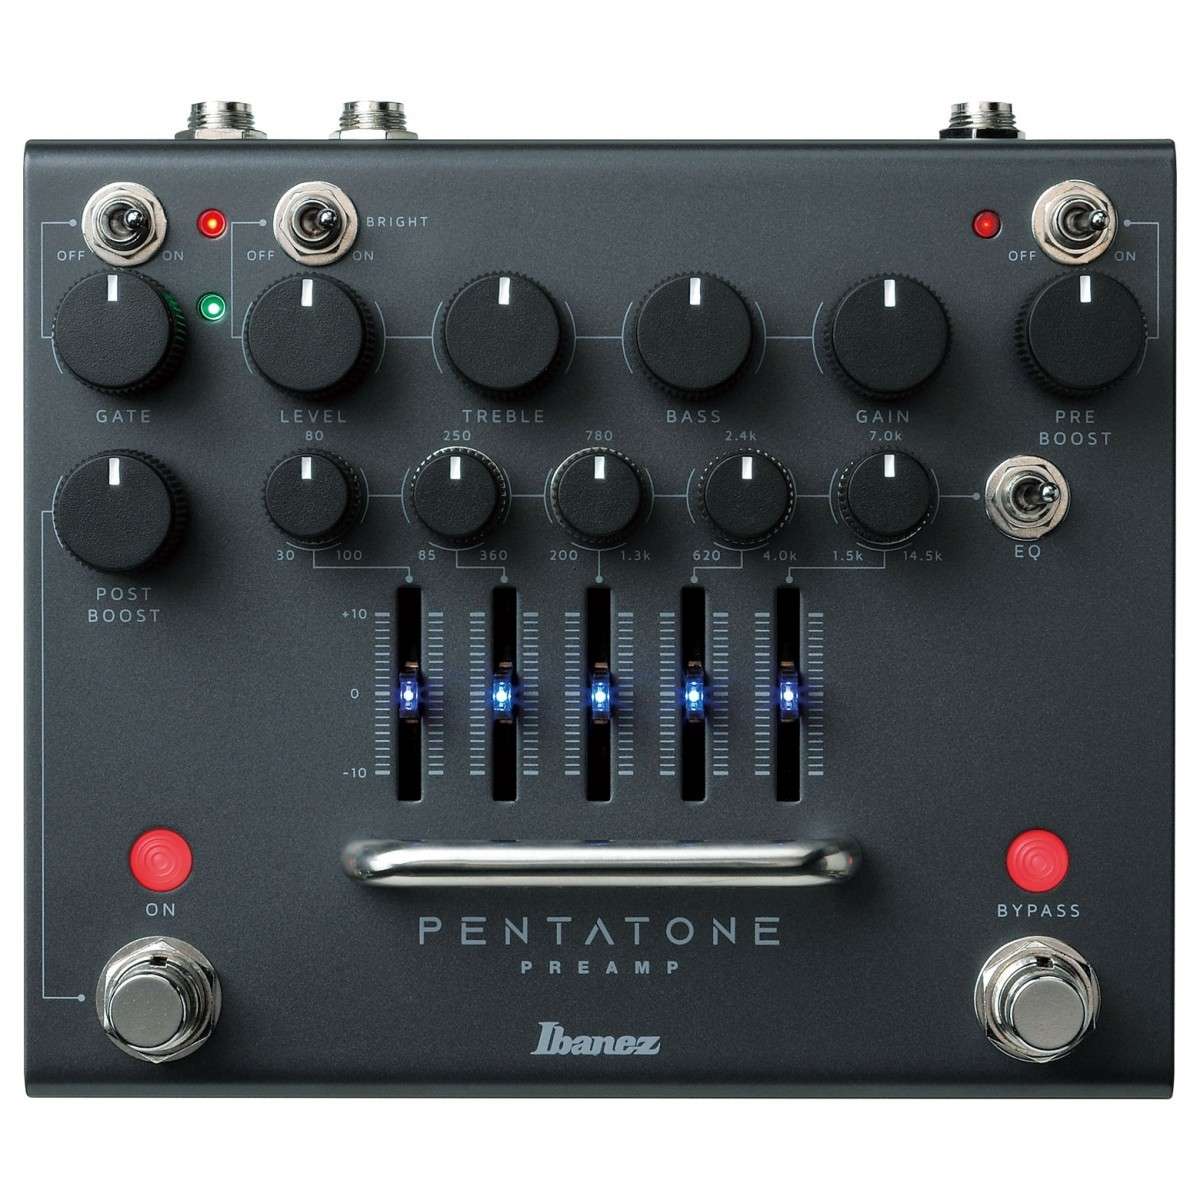 Ibanez PTPRE Pentatone Preamp Pedal - New Ibanez        Preamp    Noise Gate EQ       Boost  Analogue  Guitar Effect Pedal